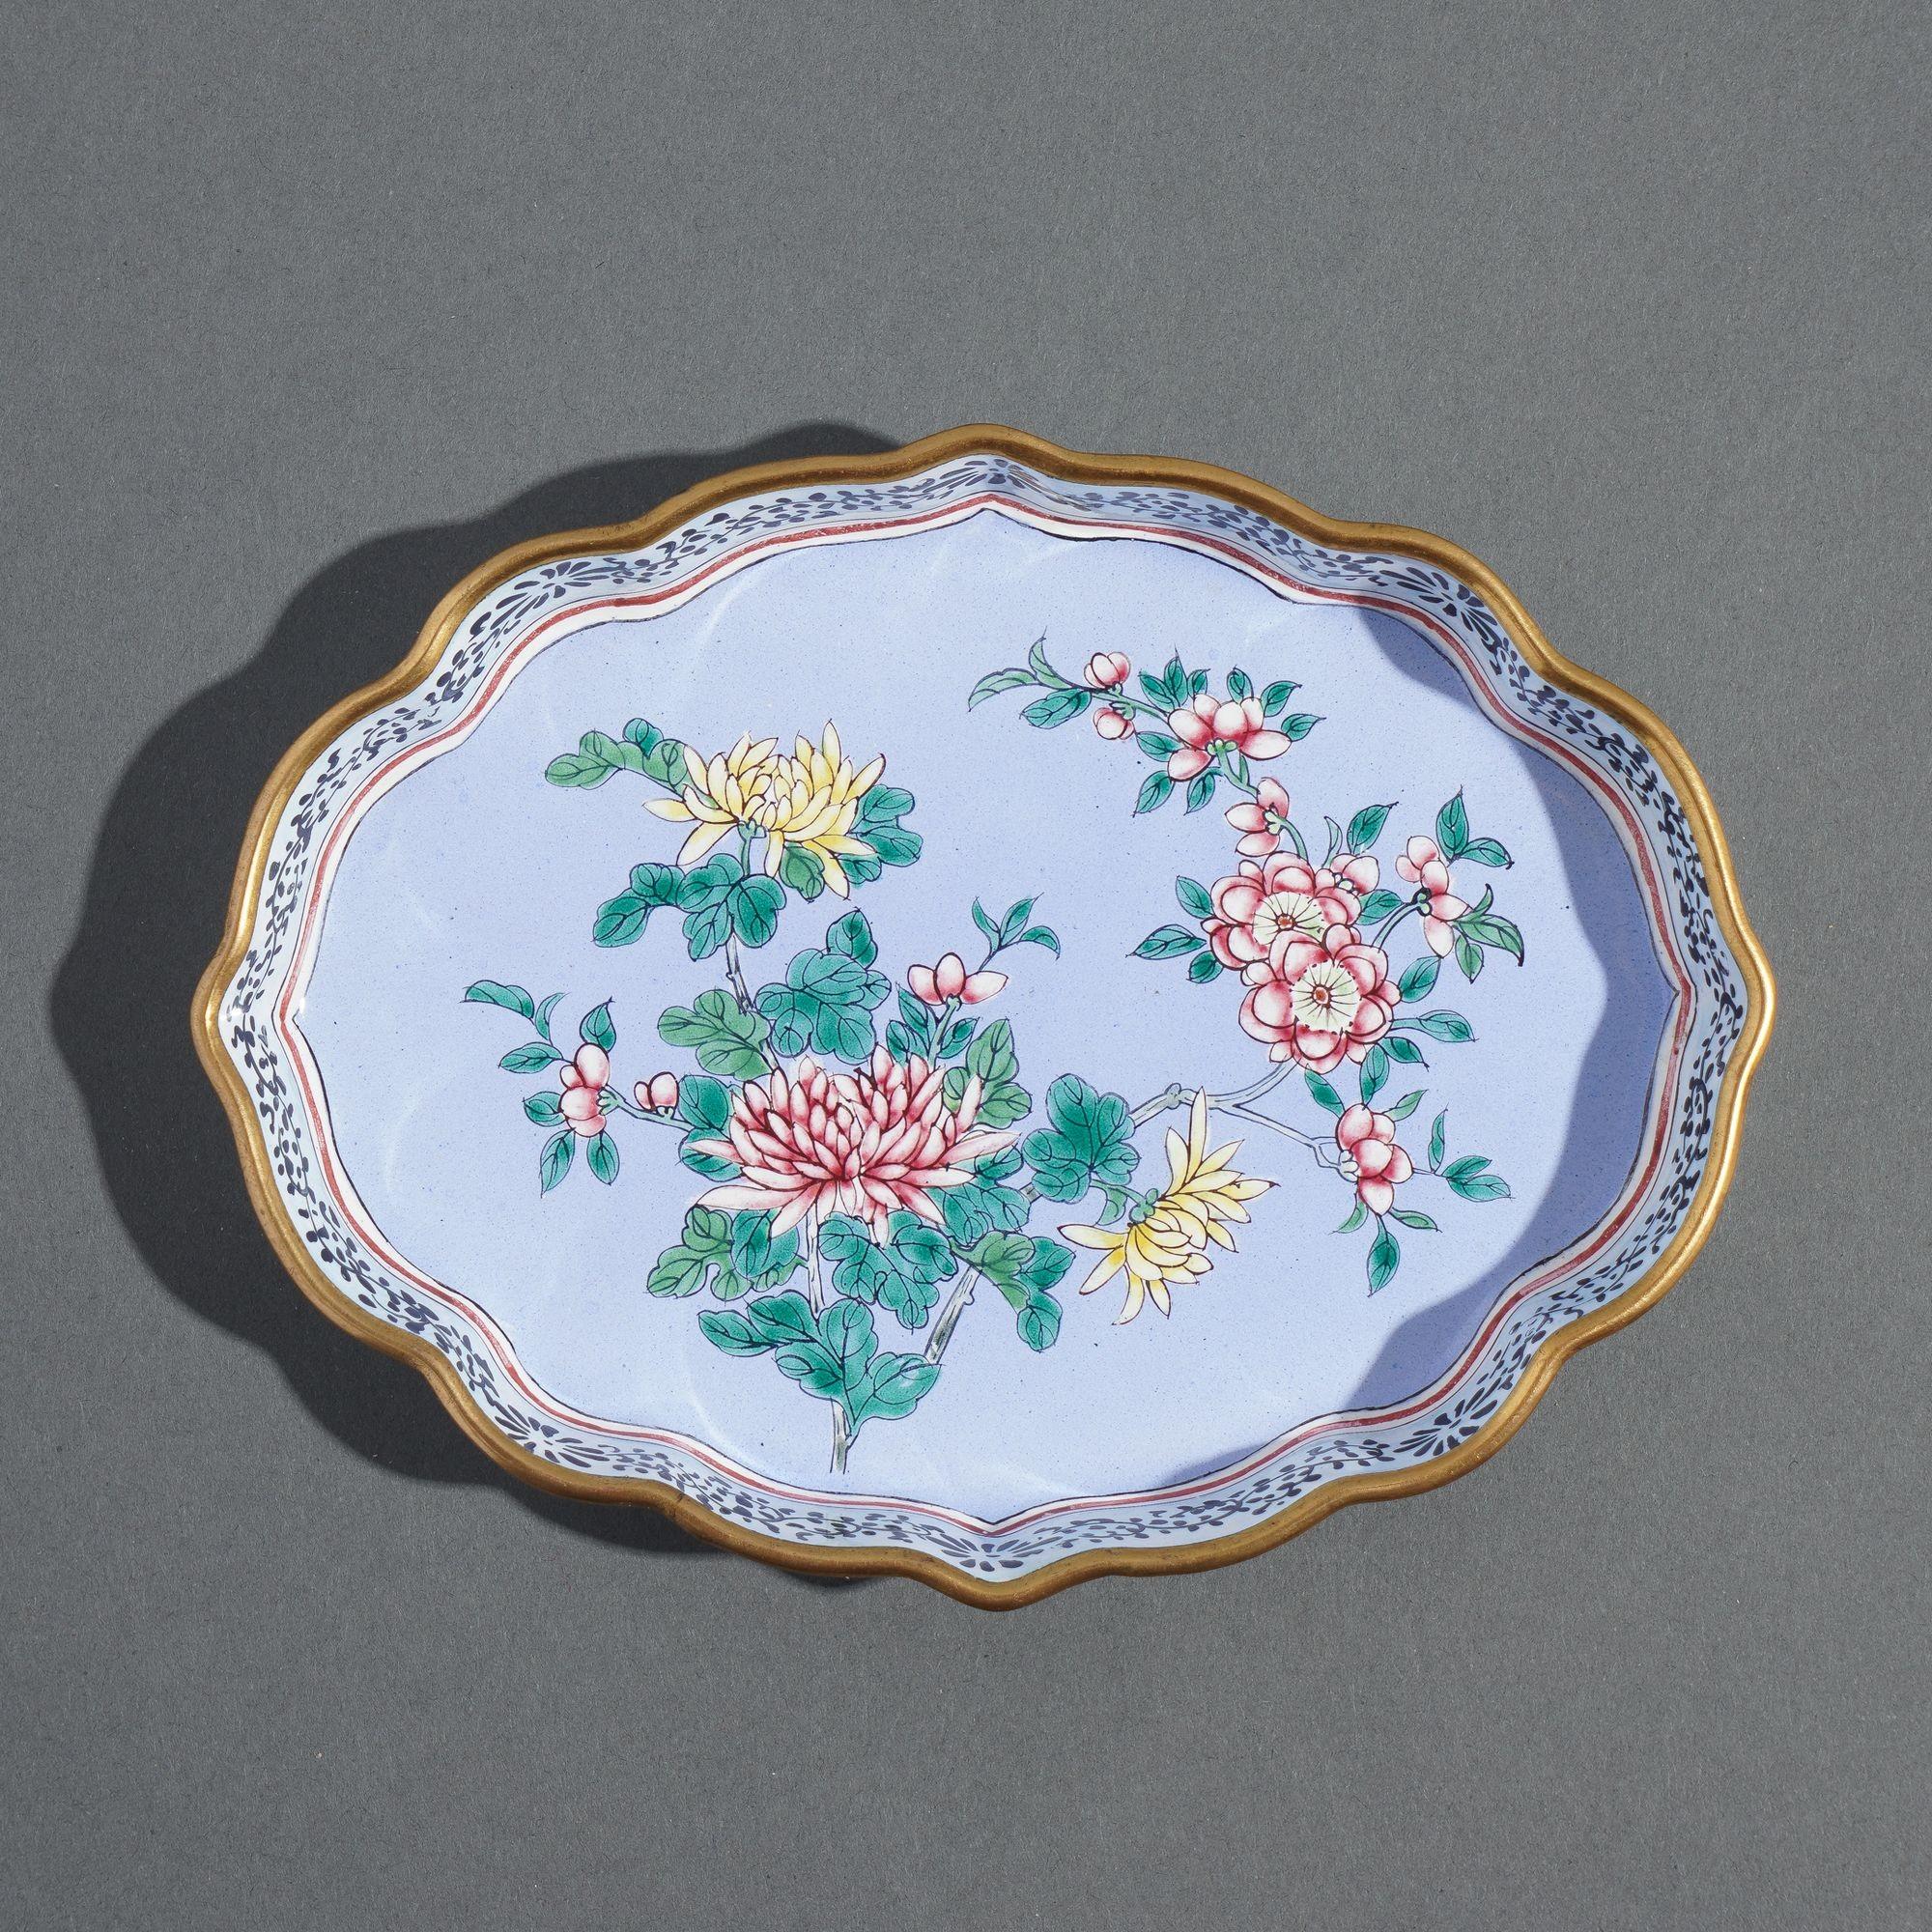 Standing rim enameled brass shaped pin tray. The decoration of mums & cherry blossoms on a periwinkle blue ground is framed with black trailing vine on the interior of the standing rim.

China, mid 20th century.